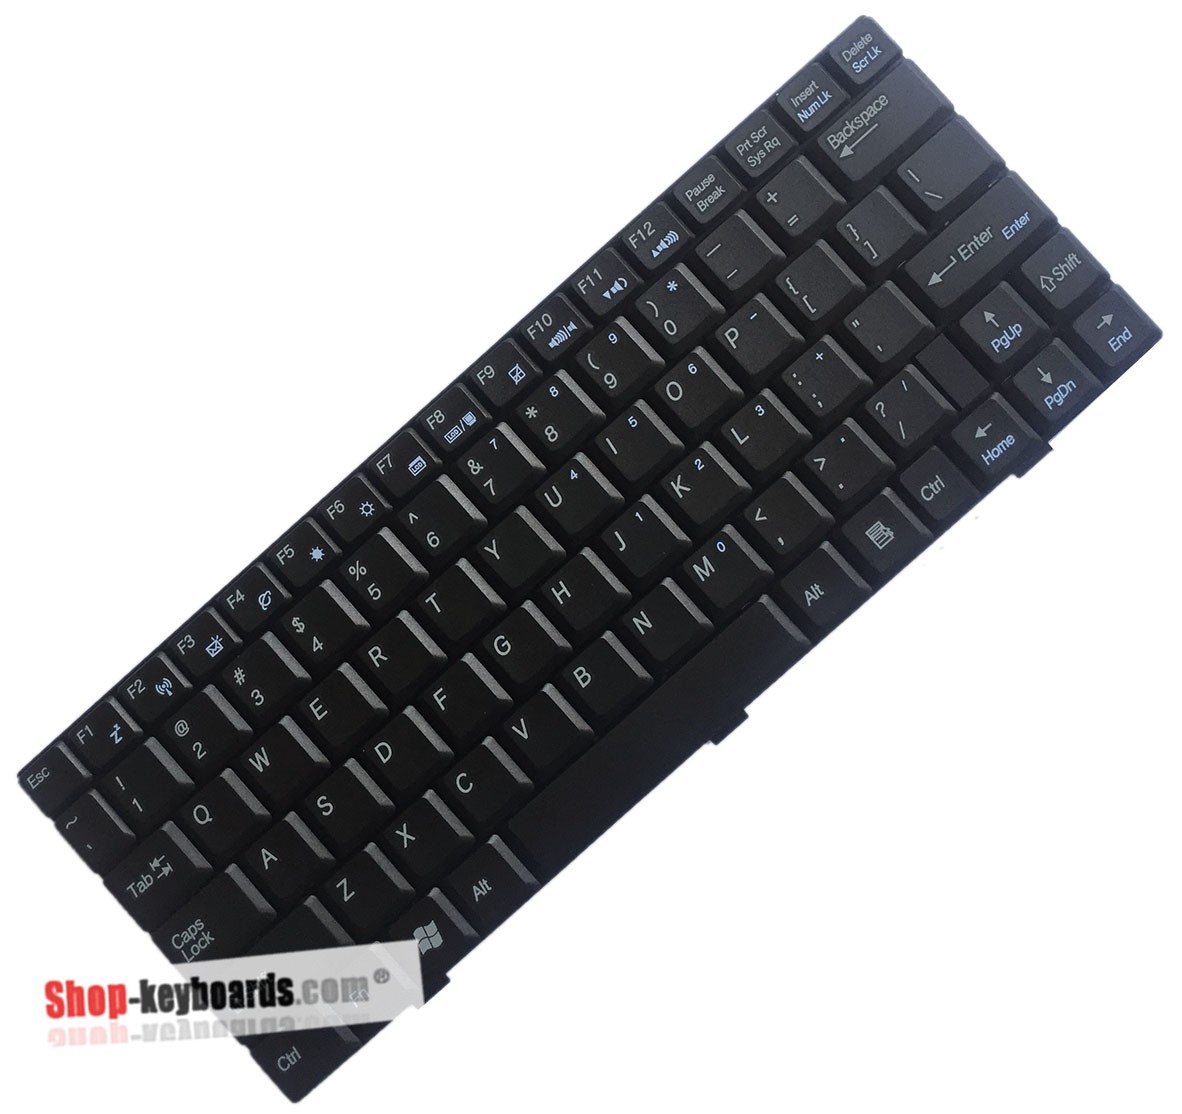 Asus Eee PC 1001HE Keyboard replacement